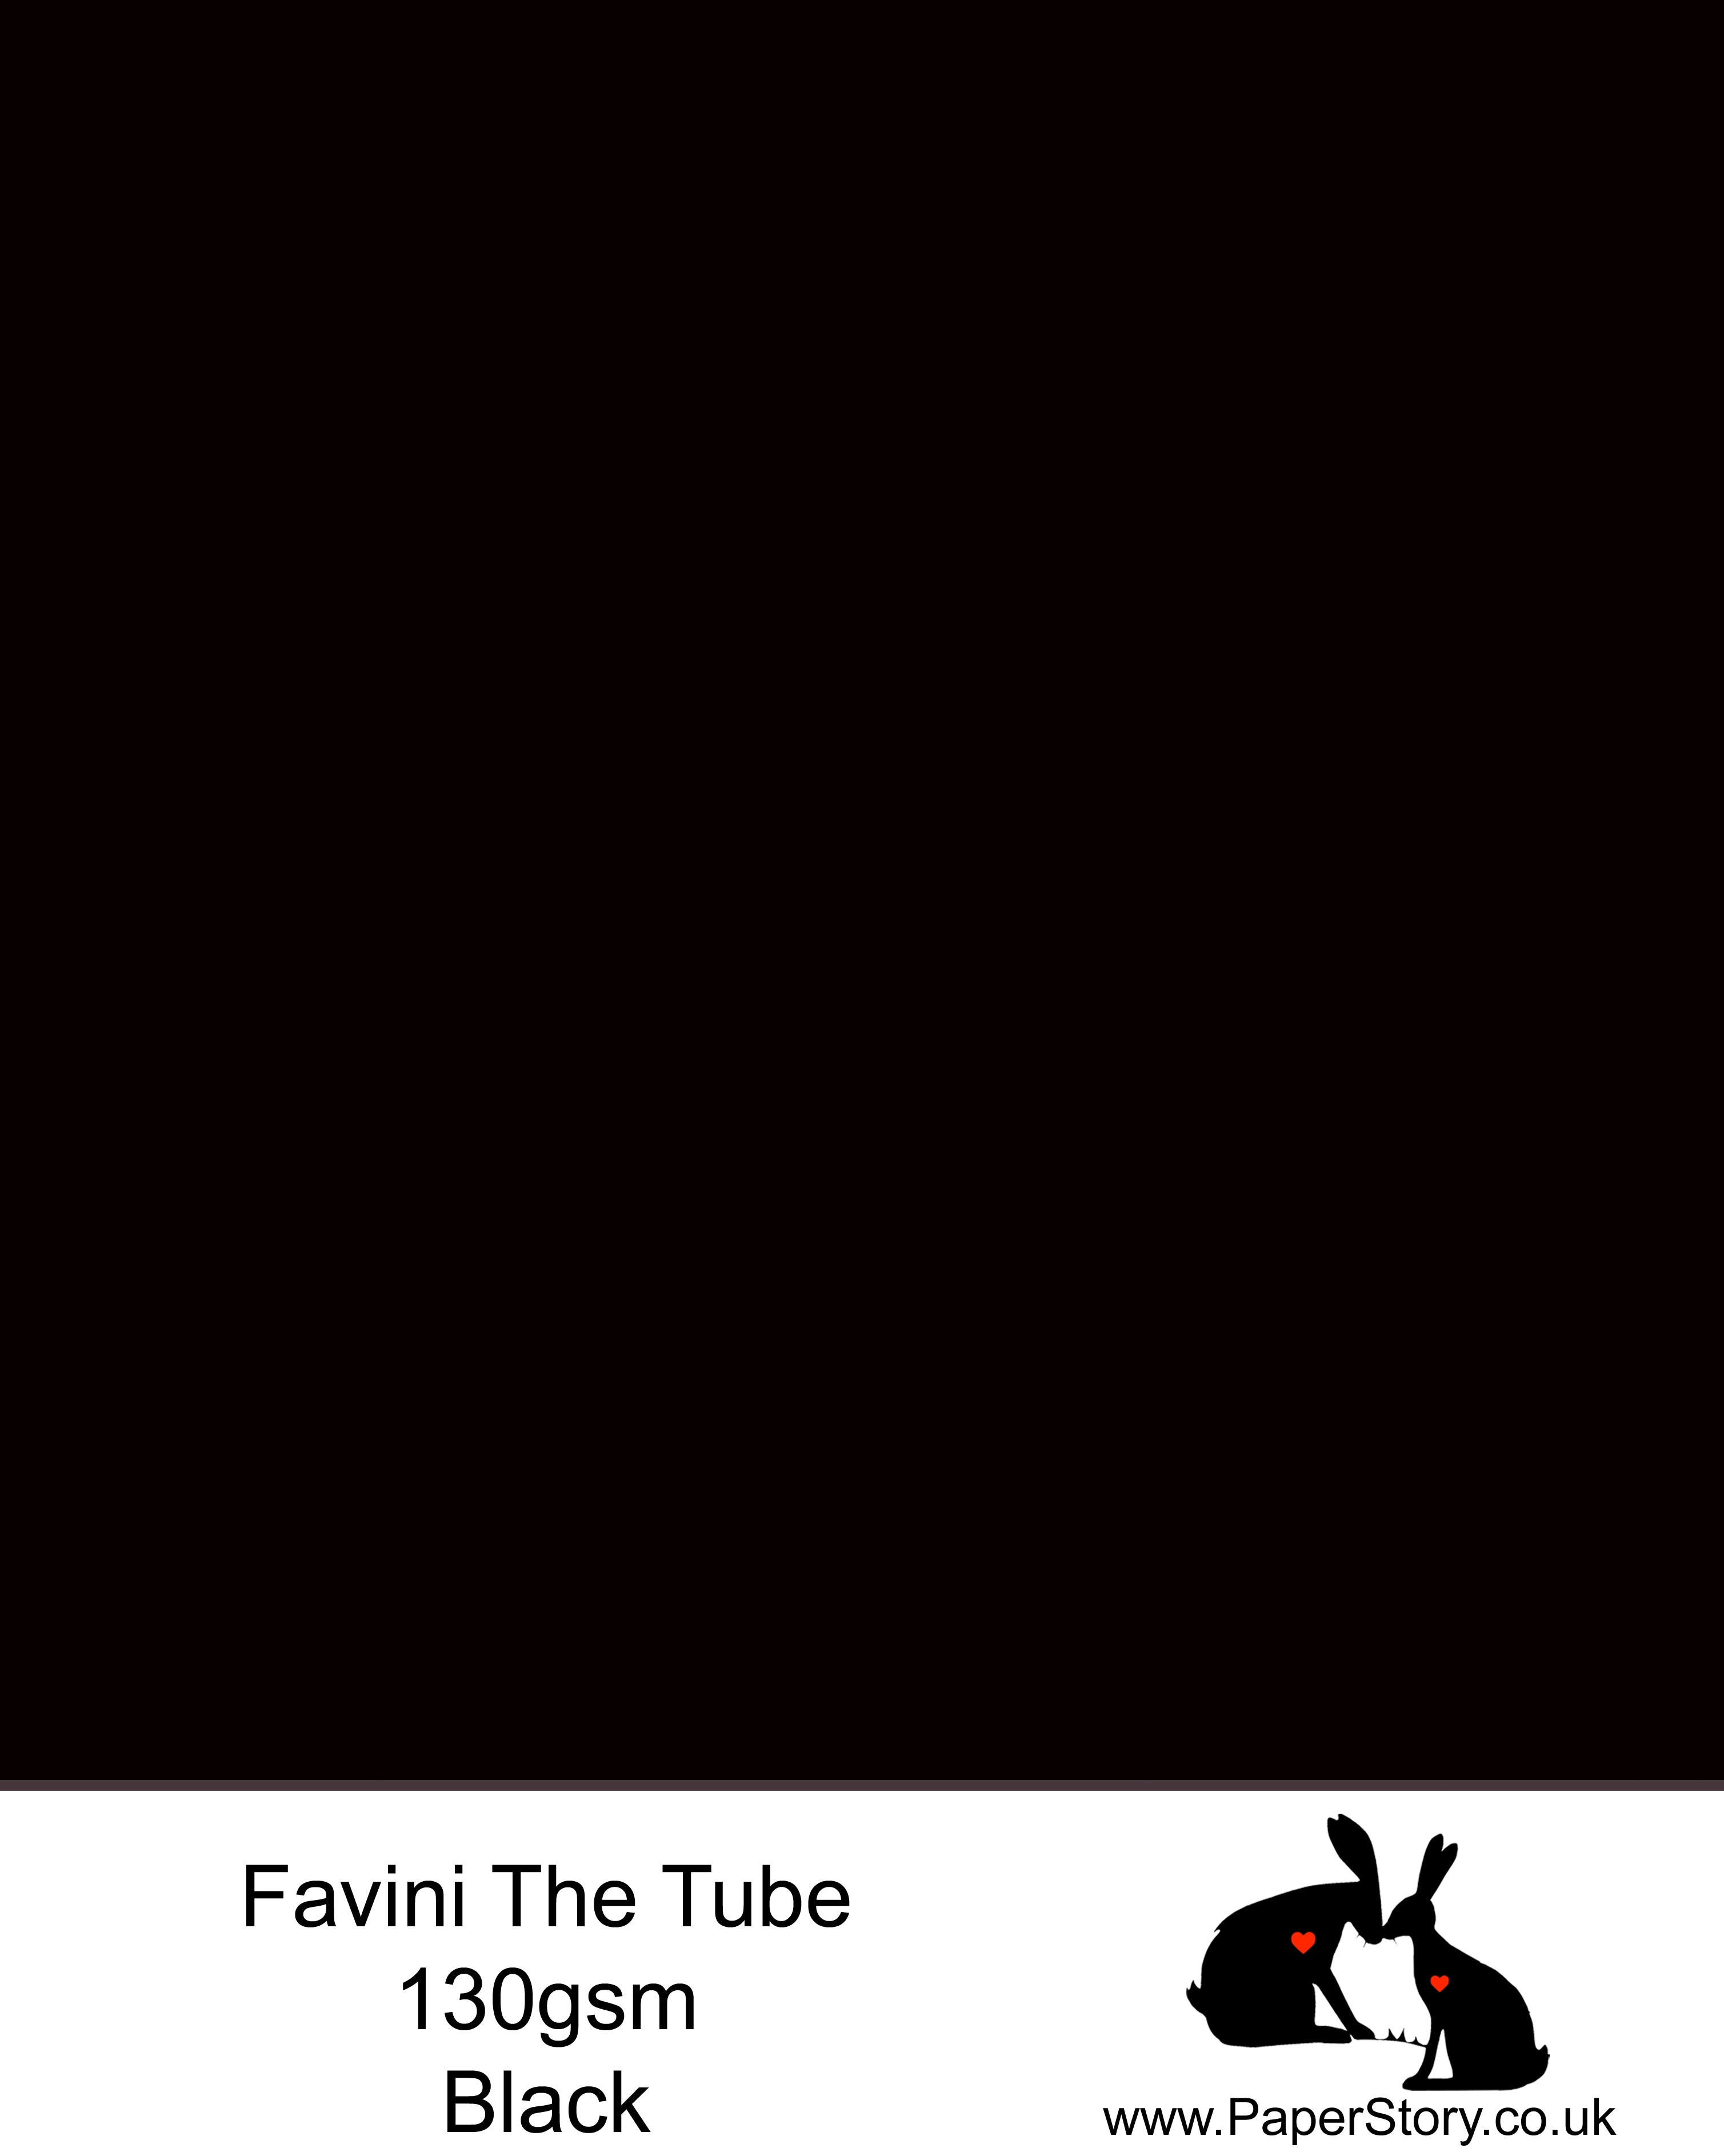 The Tube Favini Black totally Matte finish, the blackest paper in the world. is an innovative matte paper and our favourite PaperCutting paper, also be use for foil and screen blocking. The subtle soft touch of this paper provides an elegance unsurpassed by any other paper.